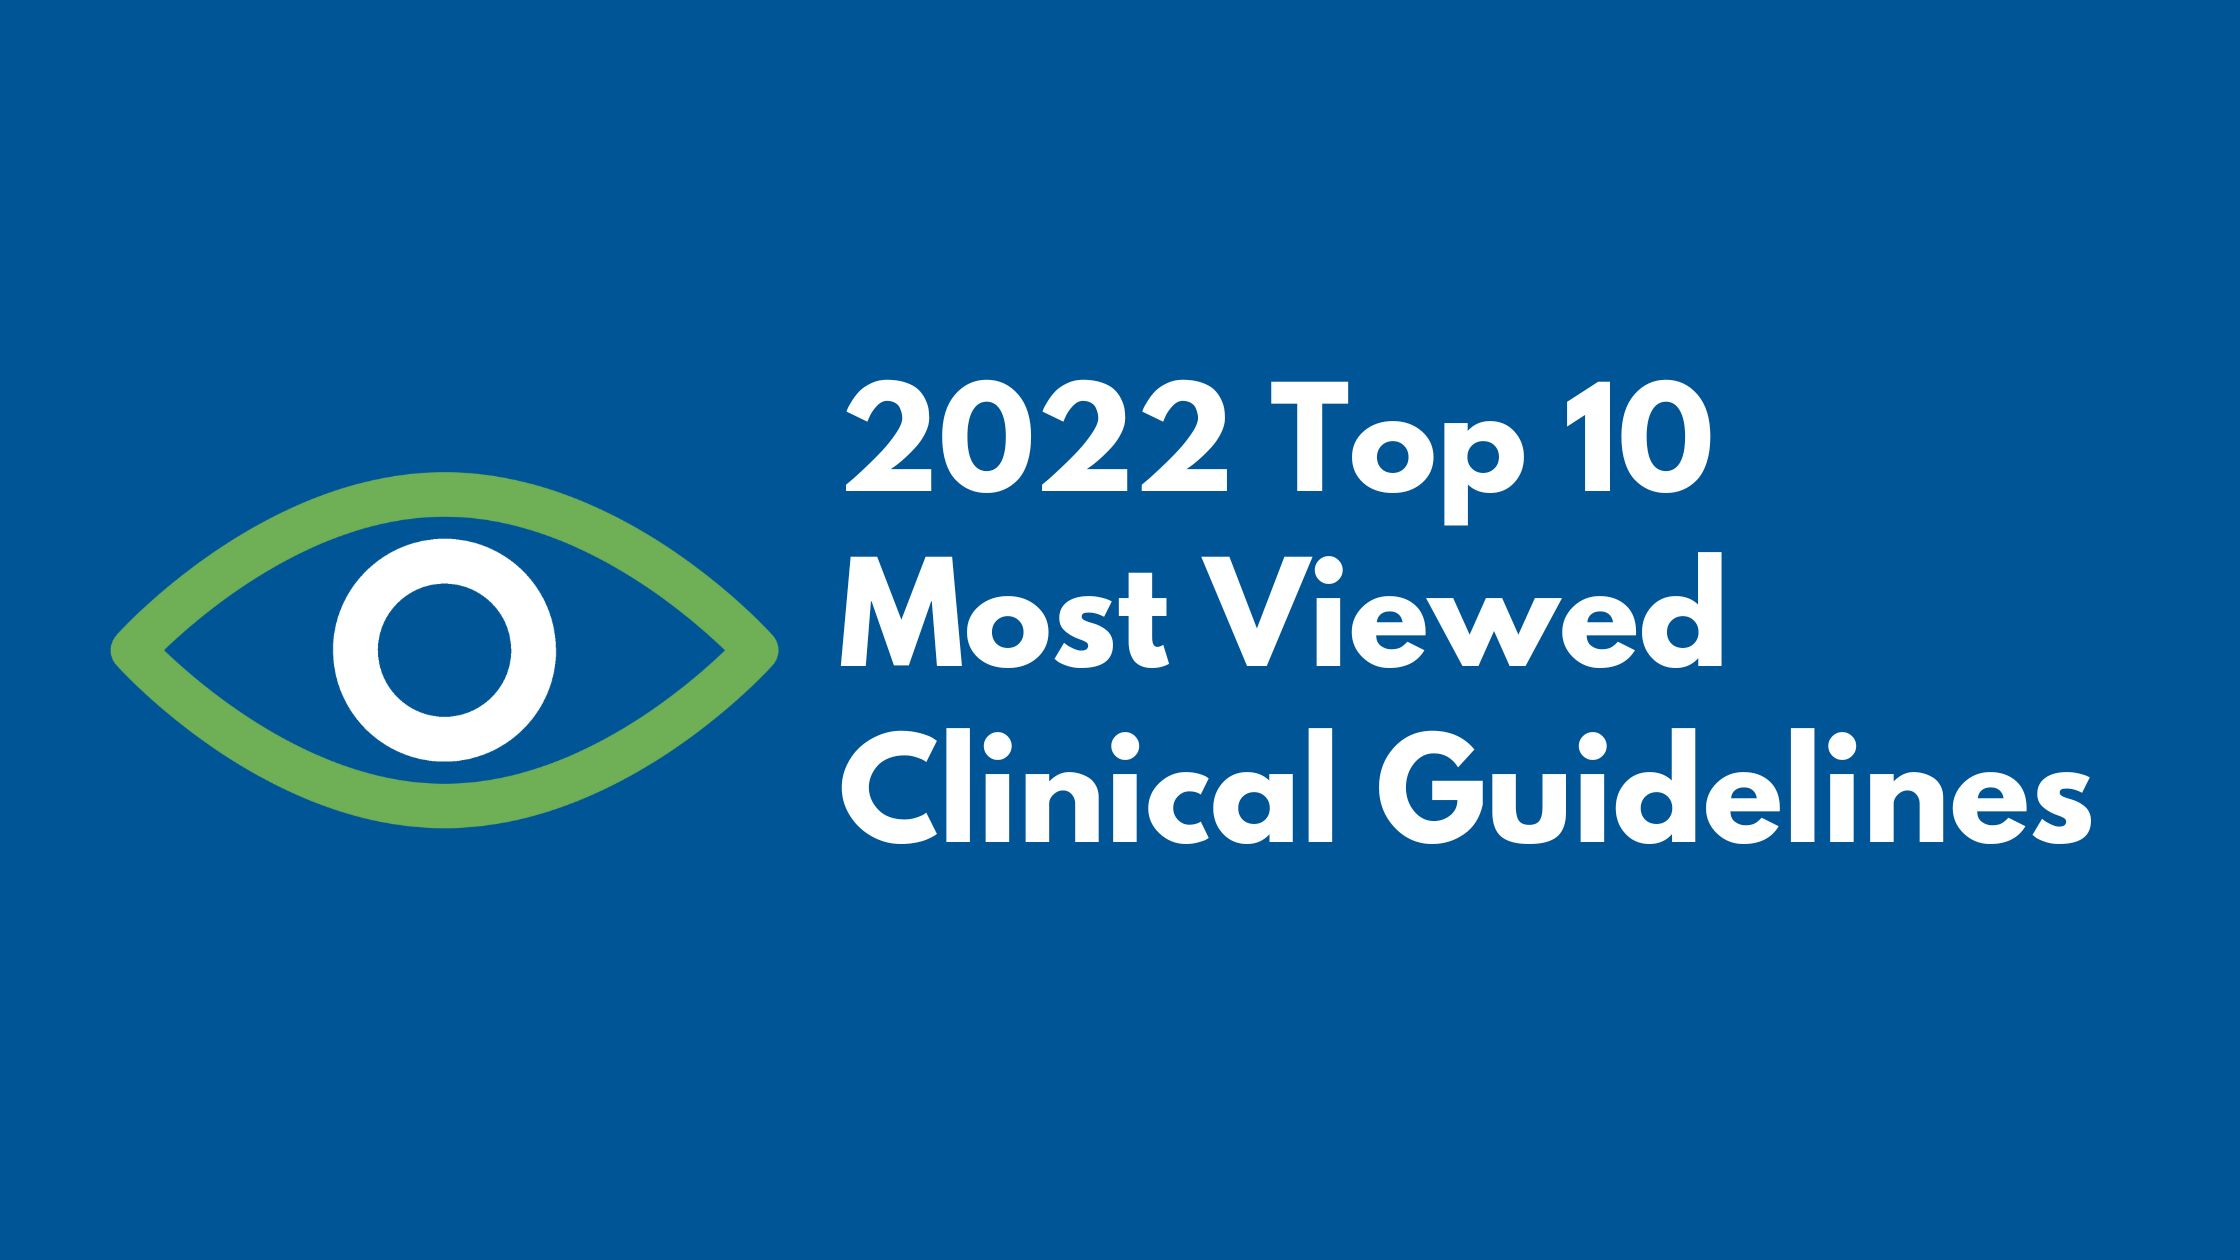 2022 Top 10 most viewed clinical guidelines hero image